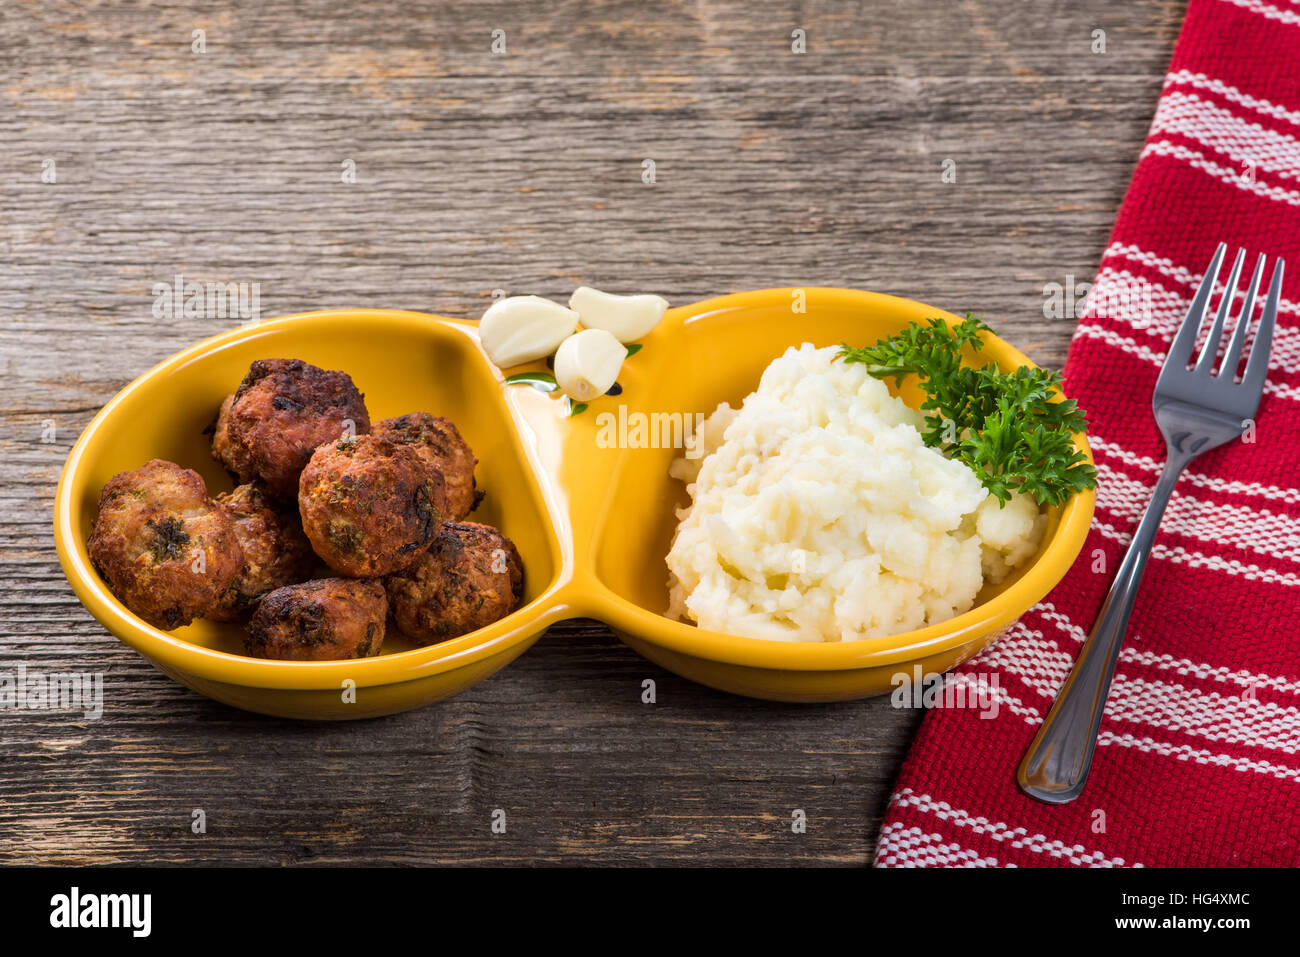 Meat patties with mashed potatoes on the table in natural light Stock Photo